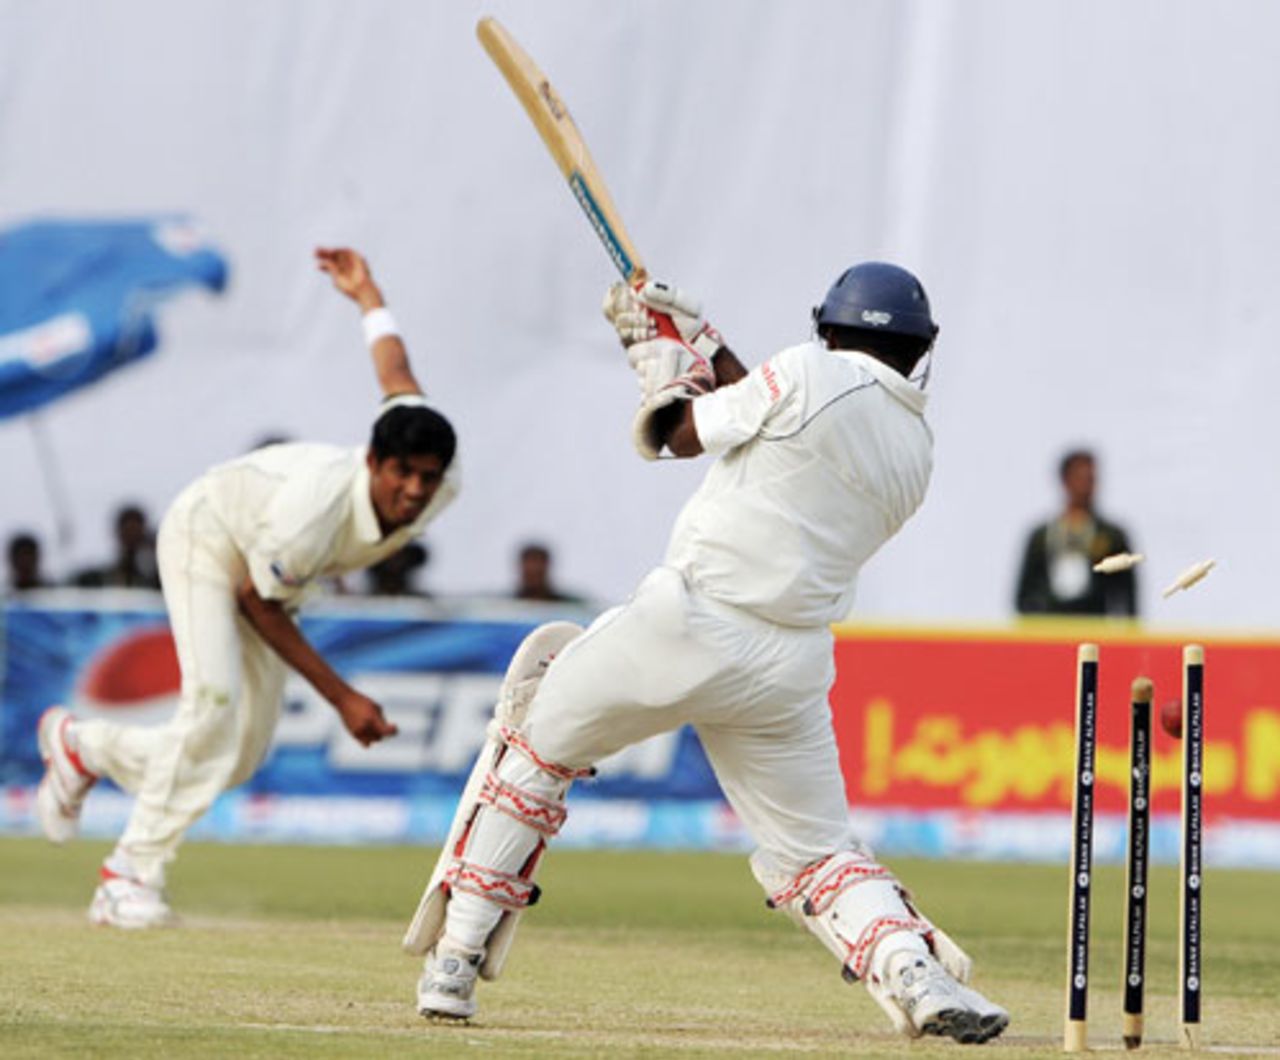 Muttiah Muralitharan's middle stump is rocked back by a Mohammad Talha delivery, Pakistan v Sri Lanka, 2nd Test, 2nd day, March 2, 2009